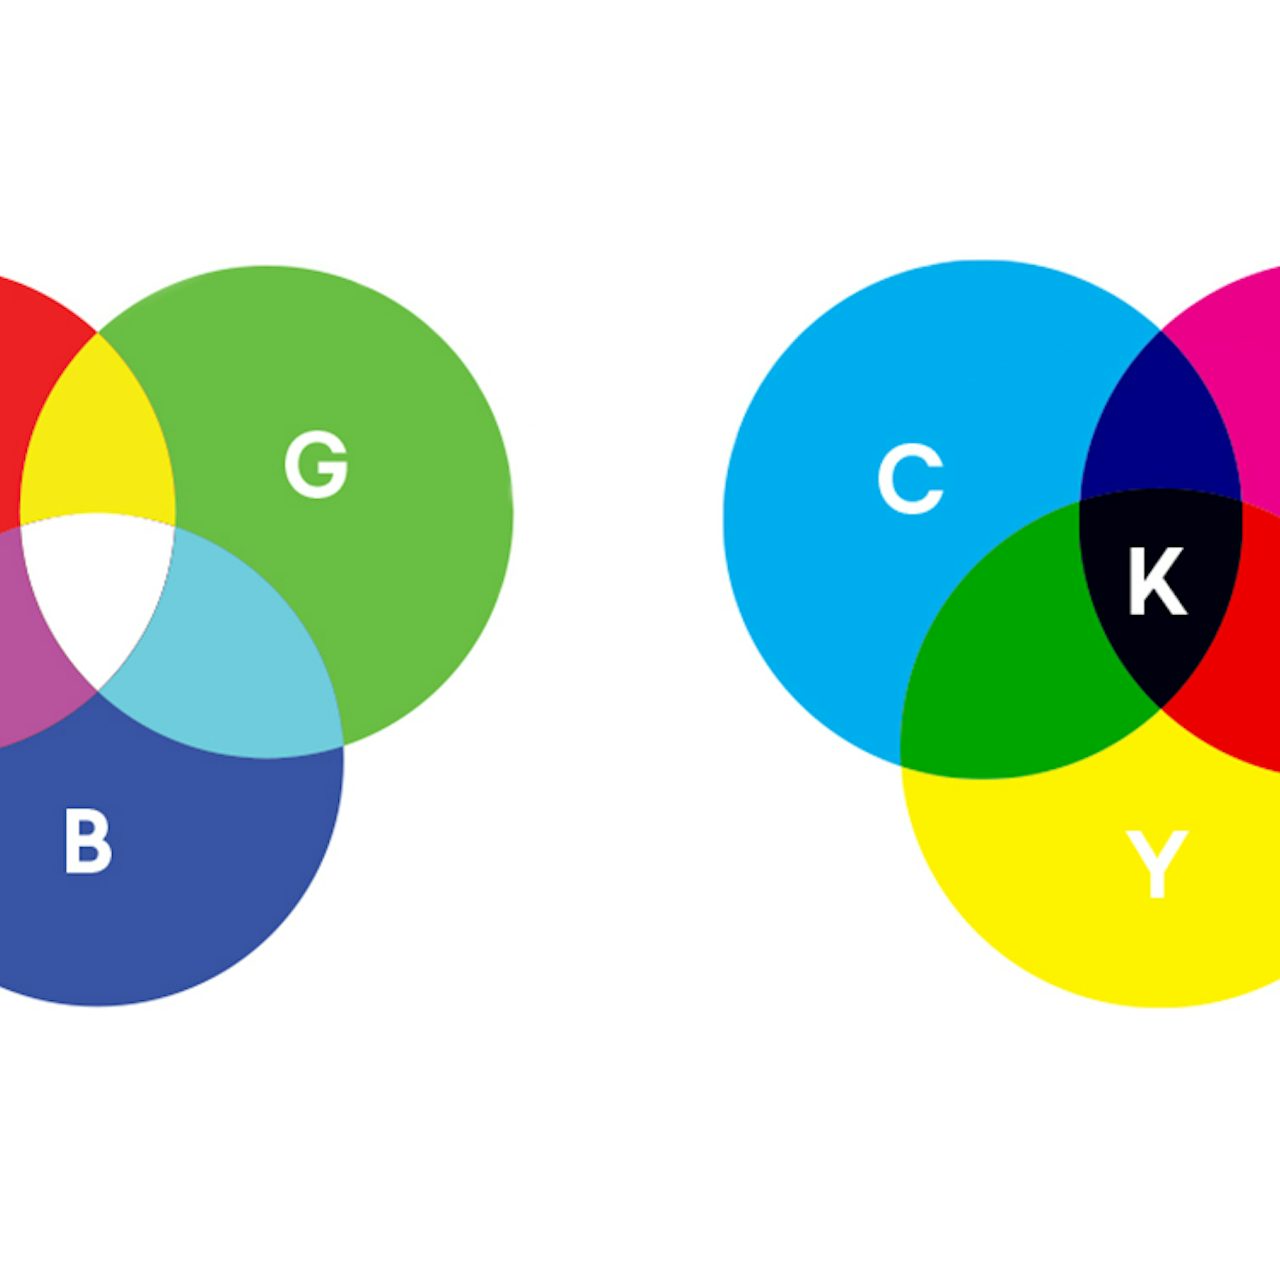 Rgb Vs Cmyk What S The Difference,Luxury Modern House Design Plans